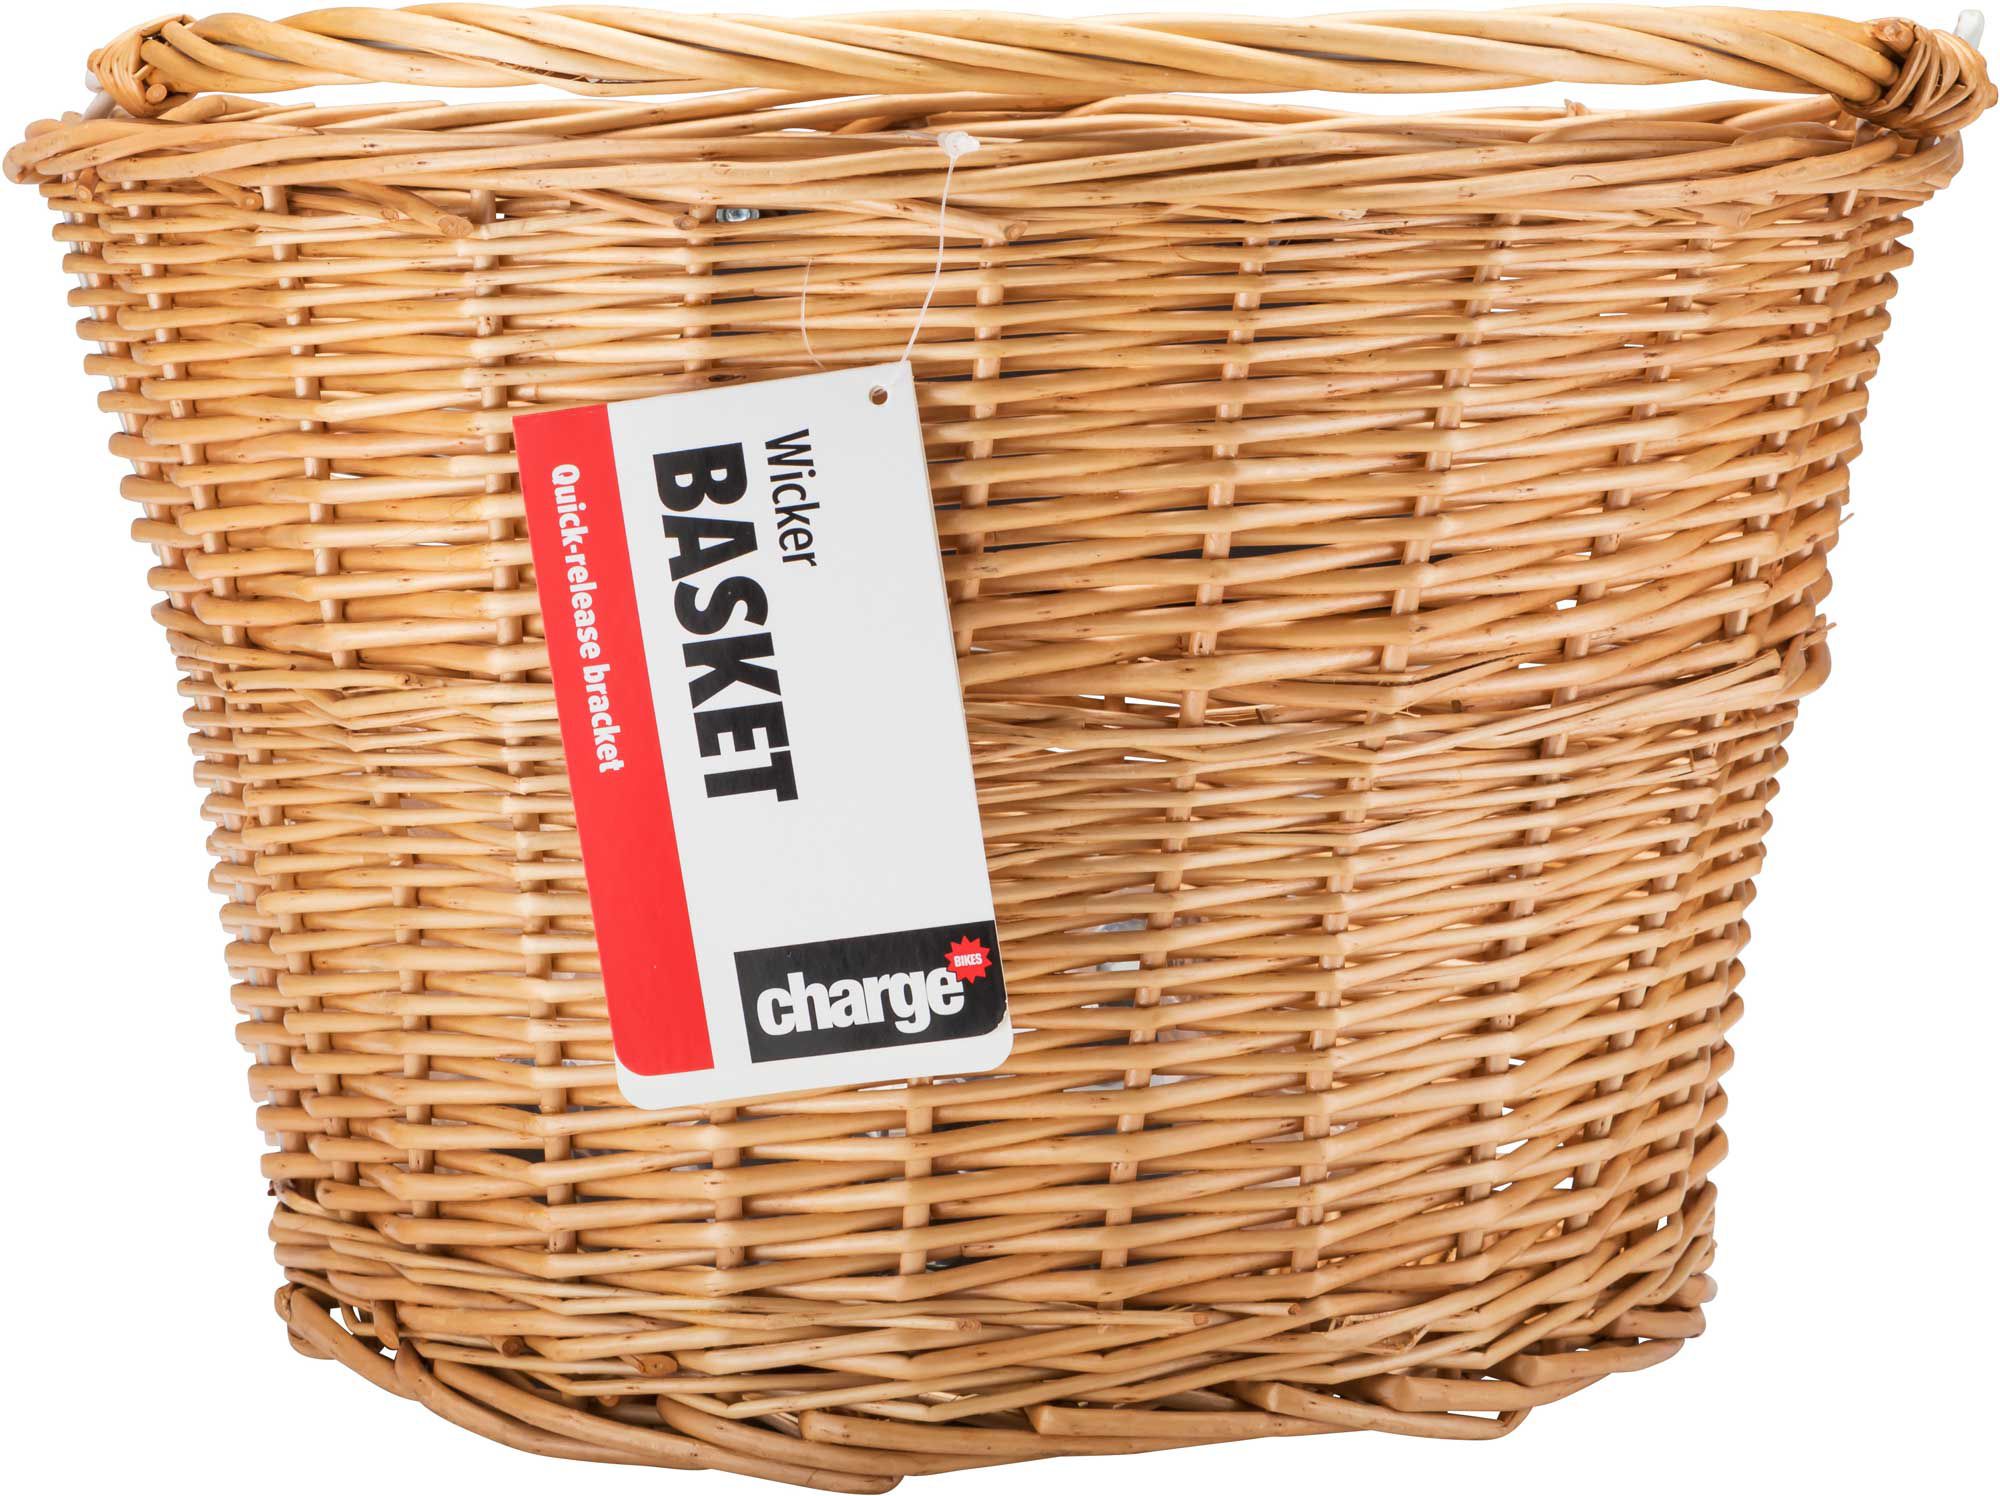 Dick's Sporting Goods Charge Wicker Bike Basket | The Market Place